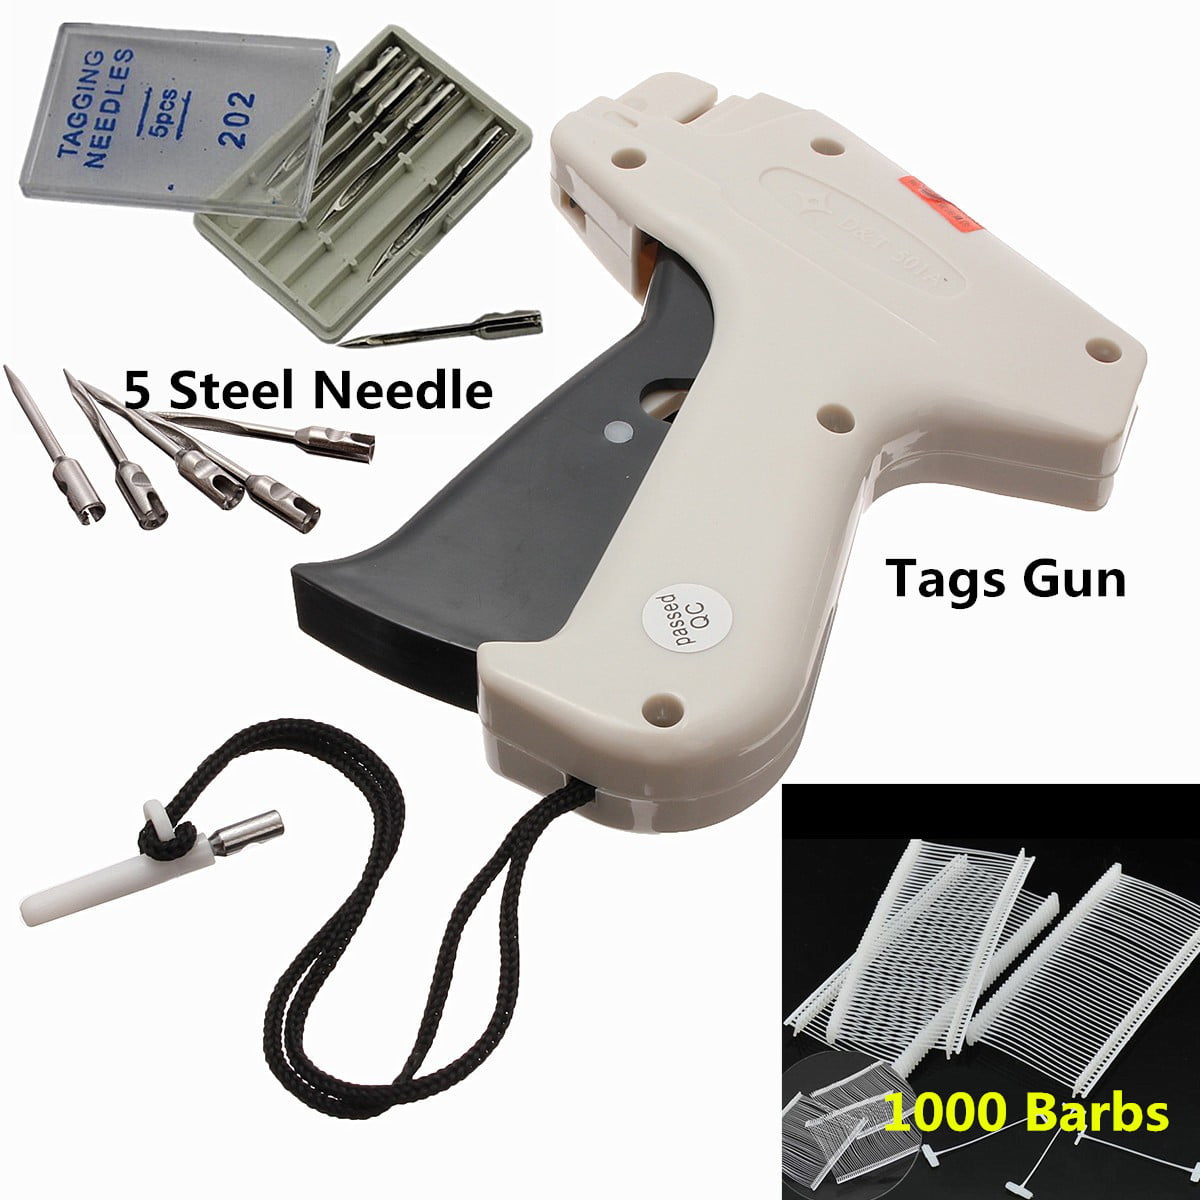 1000 Barbs+5 Needles Kit US STOCK Clothes Garment Price Label Tagging Machine 